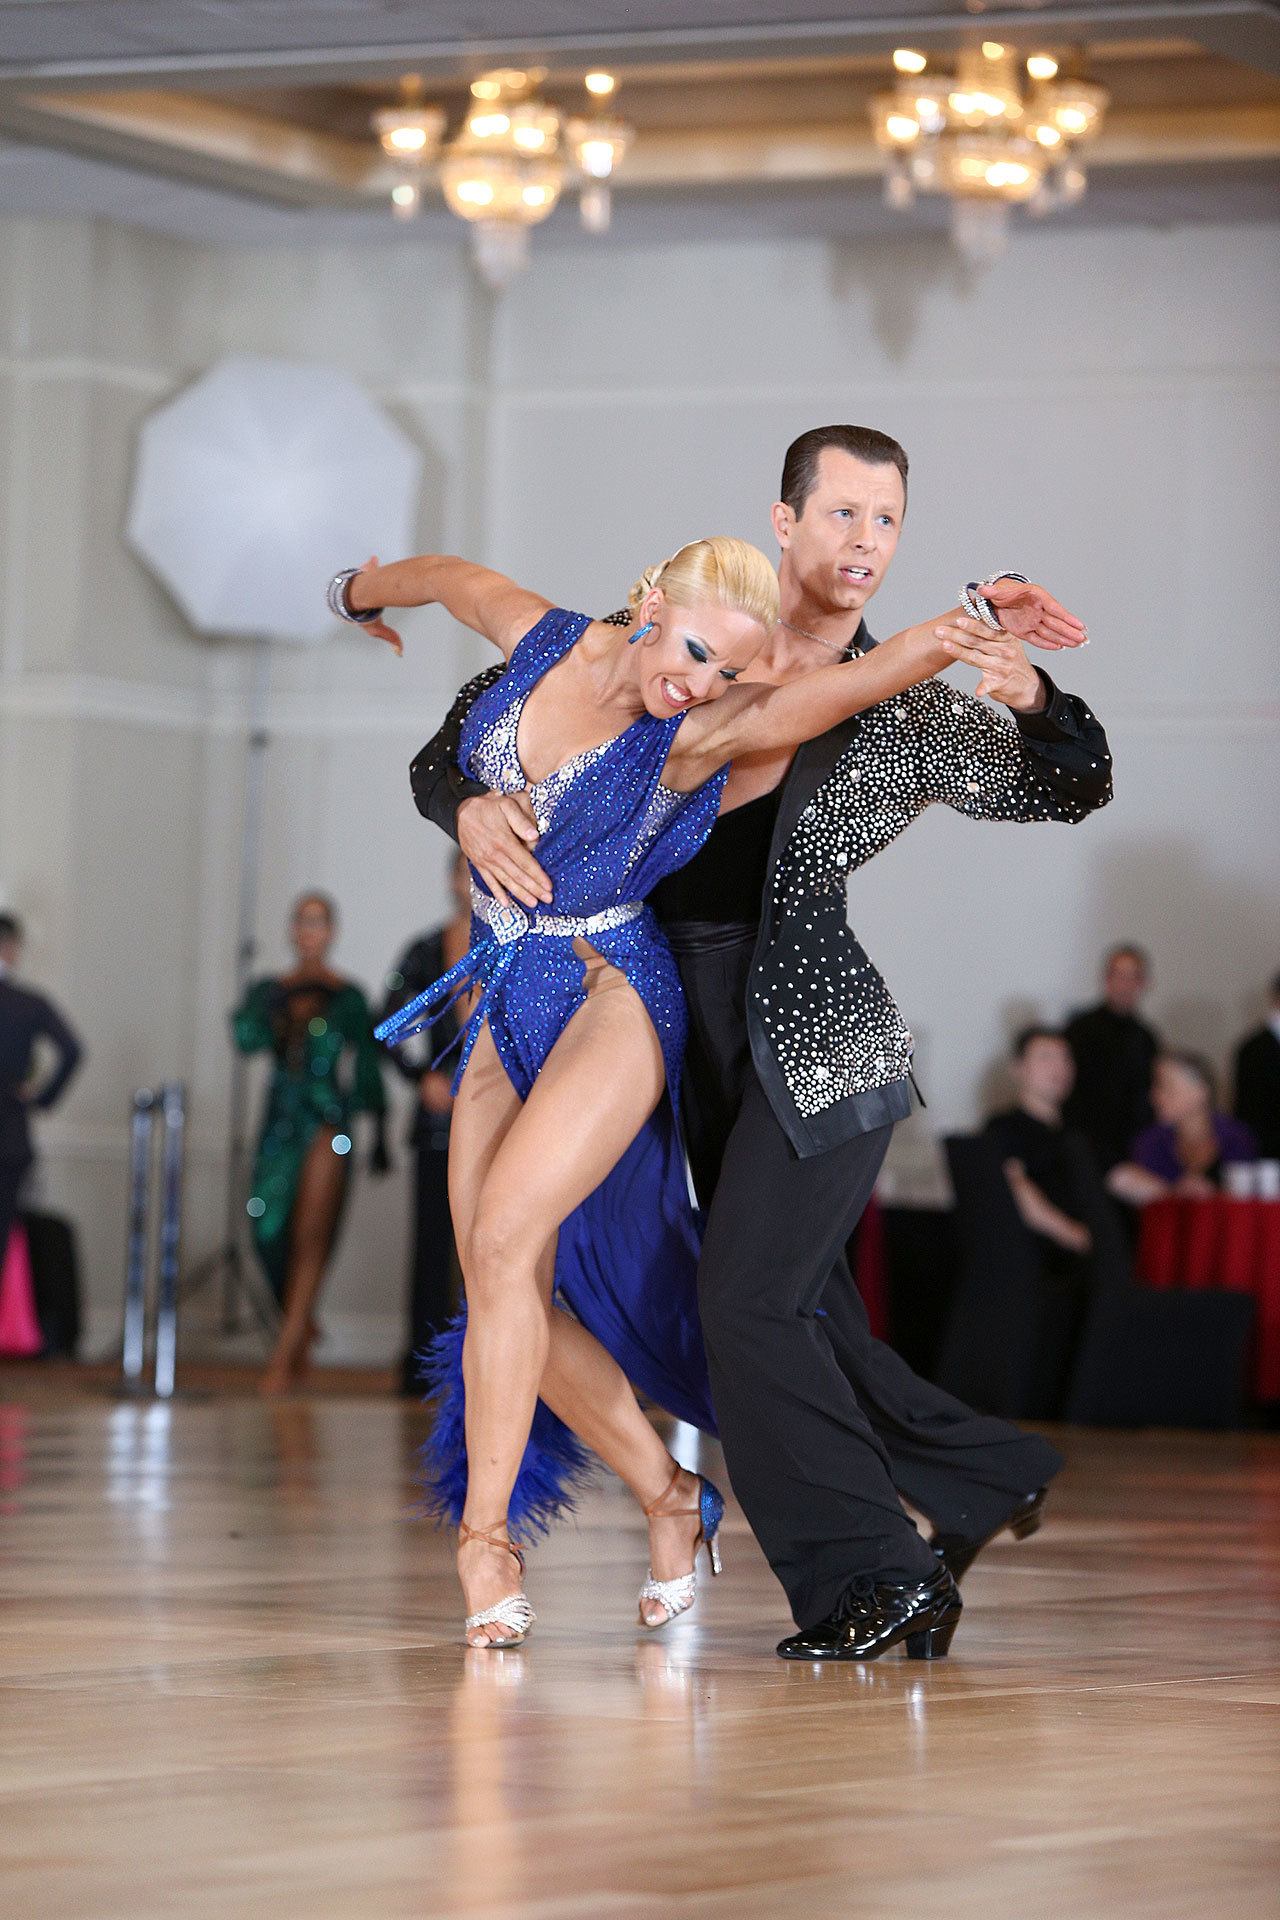 Kora Stoynova and Simeon Stoynov, who have been dancing together for 16 years, dancing at a competition in November. (Courtesy Photo)